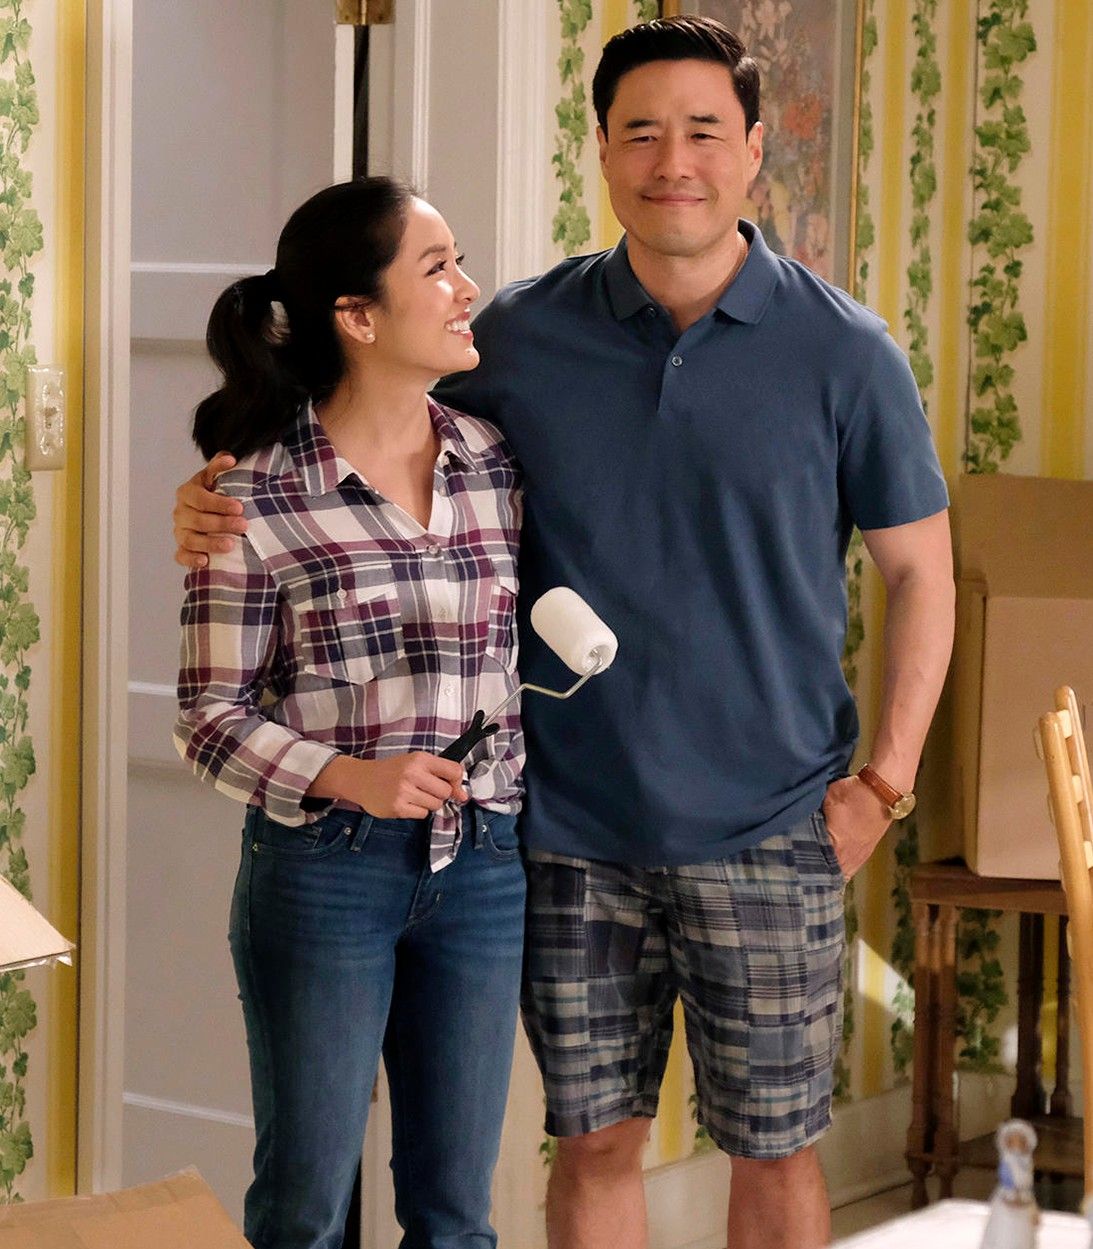 Fresh Off the Boast - Constance Wu and Randall Park